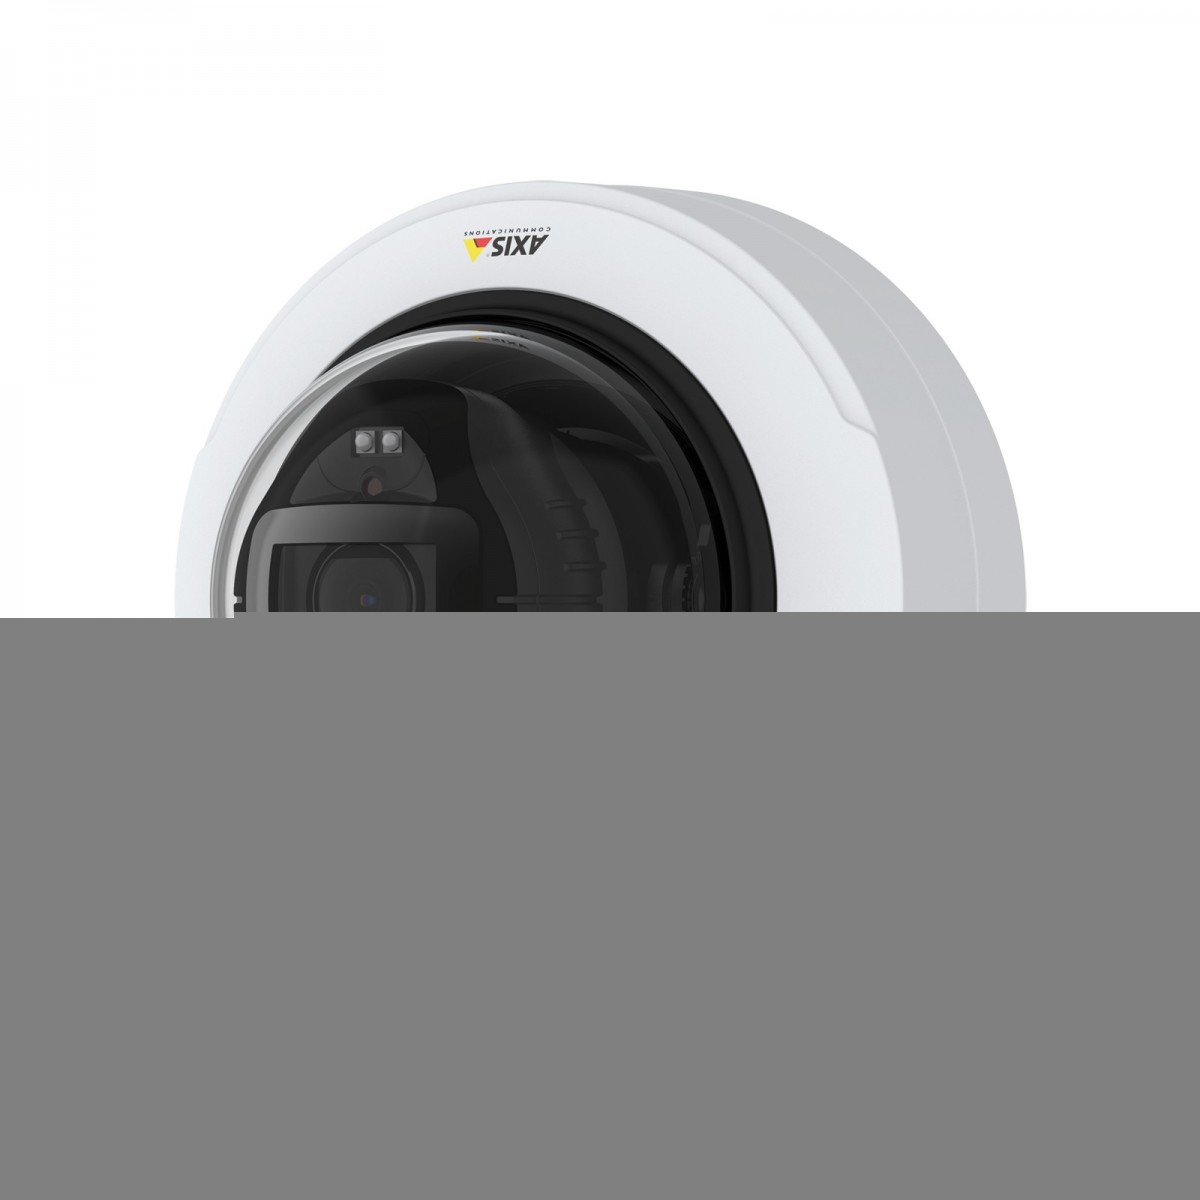 Axis P3248-LV - IP security camera - Outdoor - Wired - Dome - Ceiling-wall - Black - White